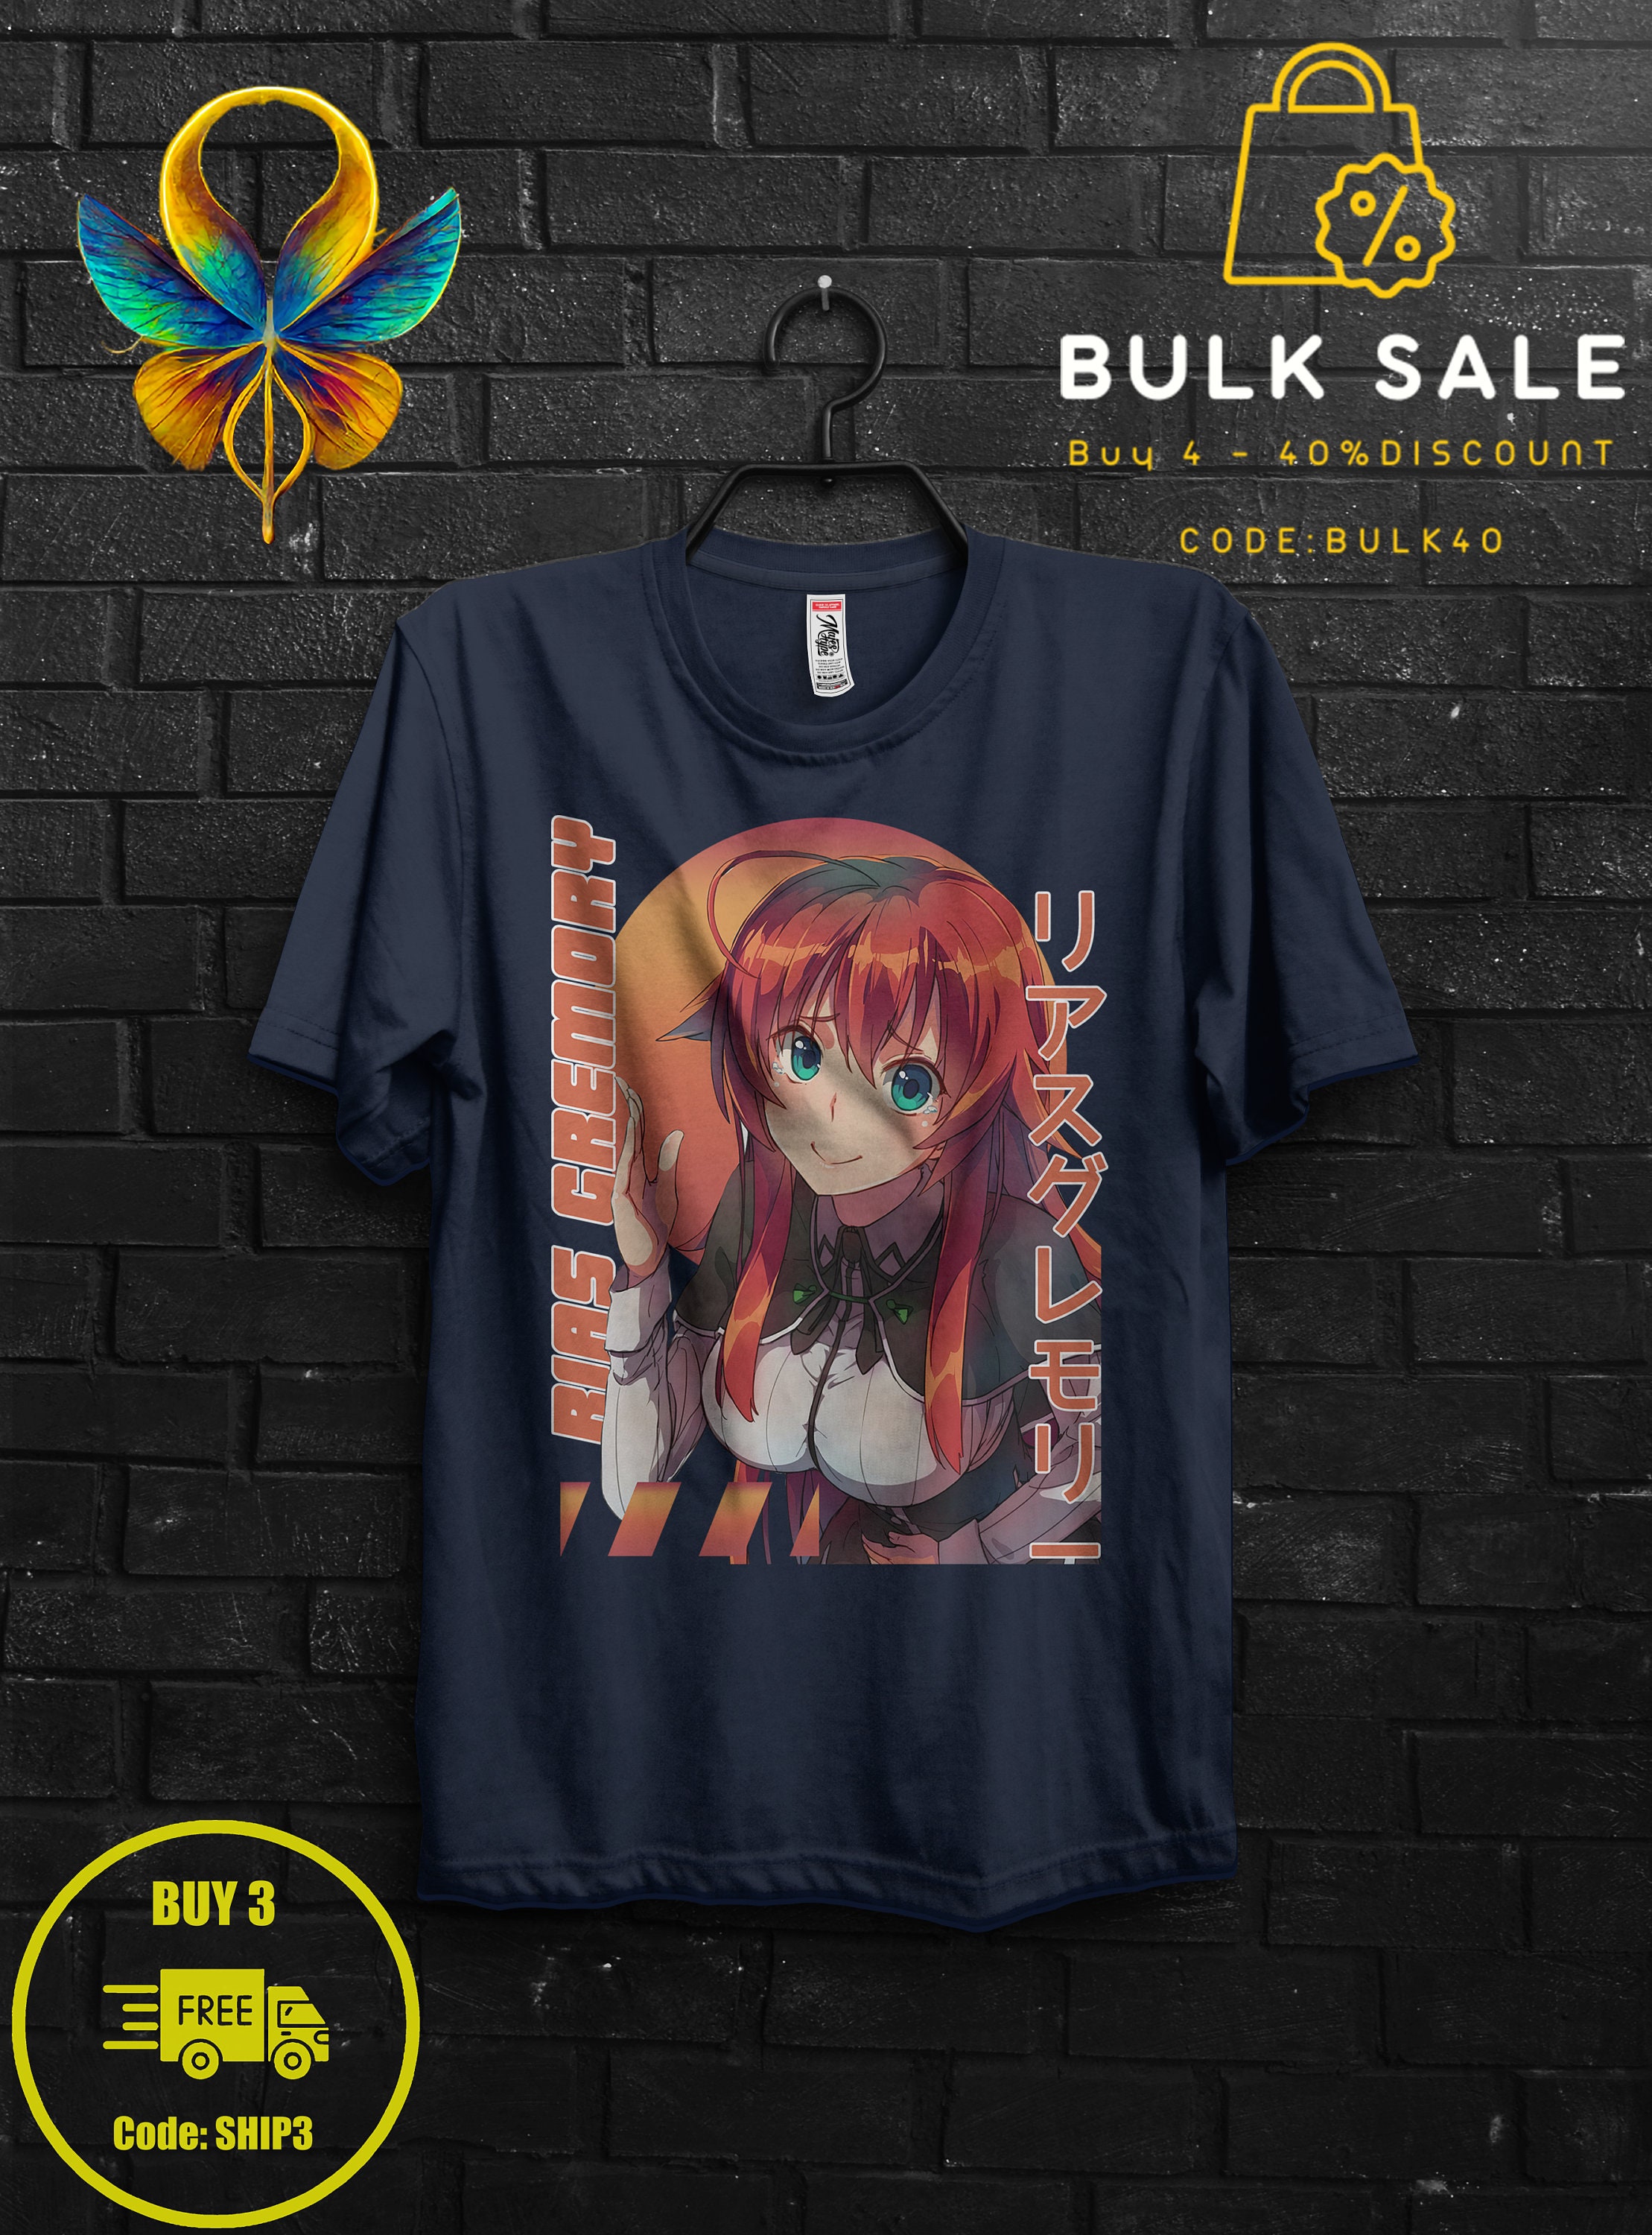 Rias Gremory Shirt Anime Gift Cosplay For Girl,Xenovia Appareal For Sitri,Rossweisse Tshirt For Her,Issei Hyoudou Sweat,High School DxD Tee 1586083272